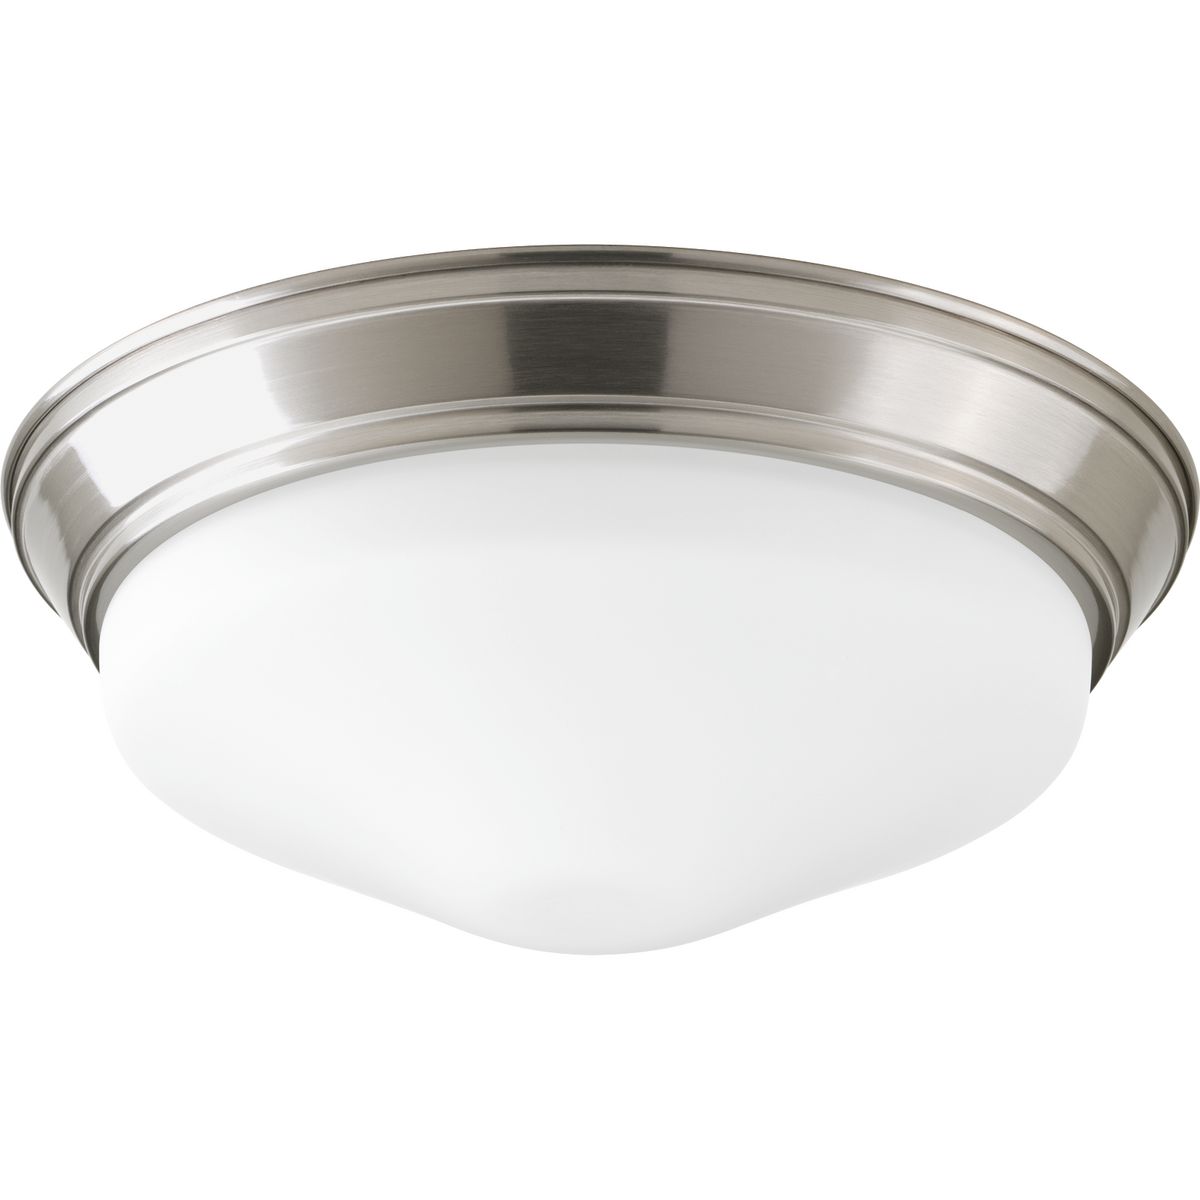 One-light 12-3/4 in LED Flush Mount series featuring an etched glass shade in a Brushed Nickel finish. Fixtures are dimmable to 10 percent with Triac or ELV dimmers.